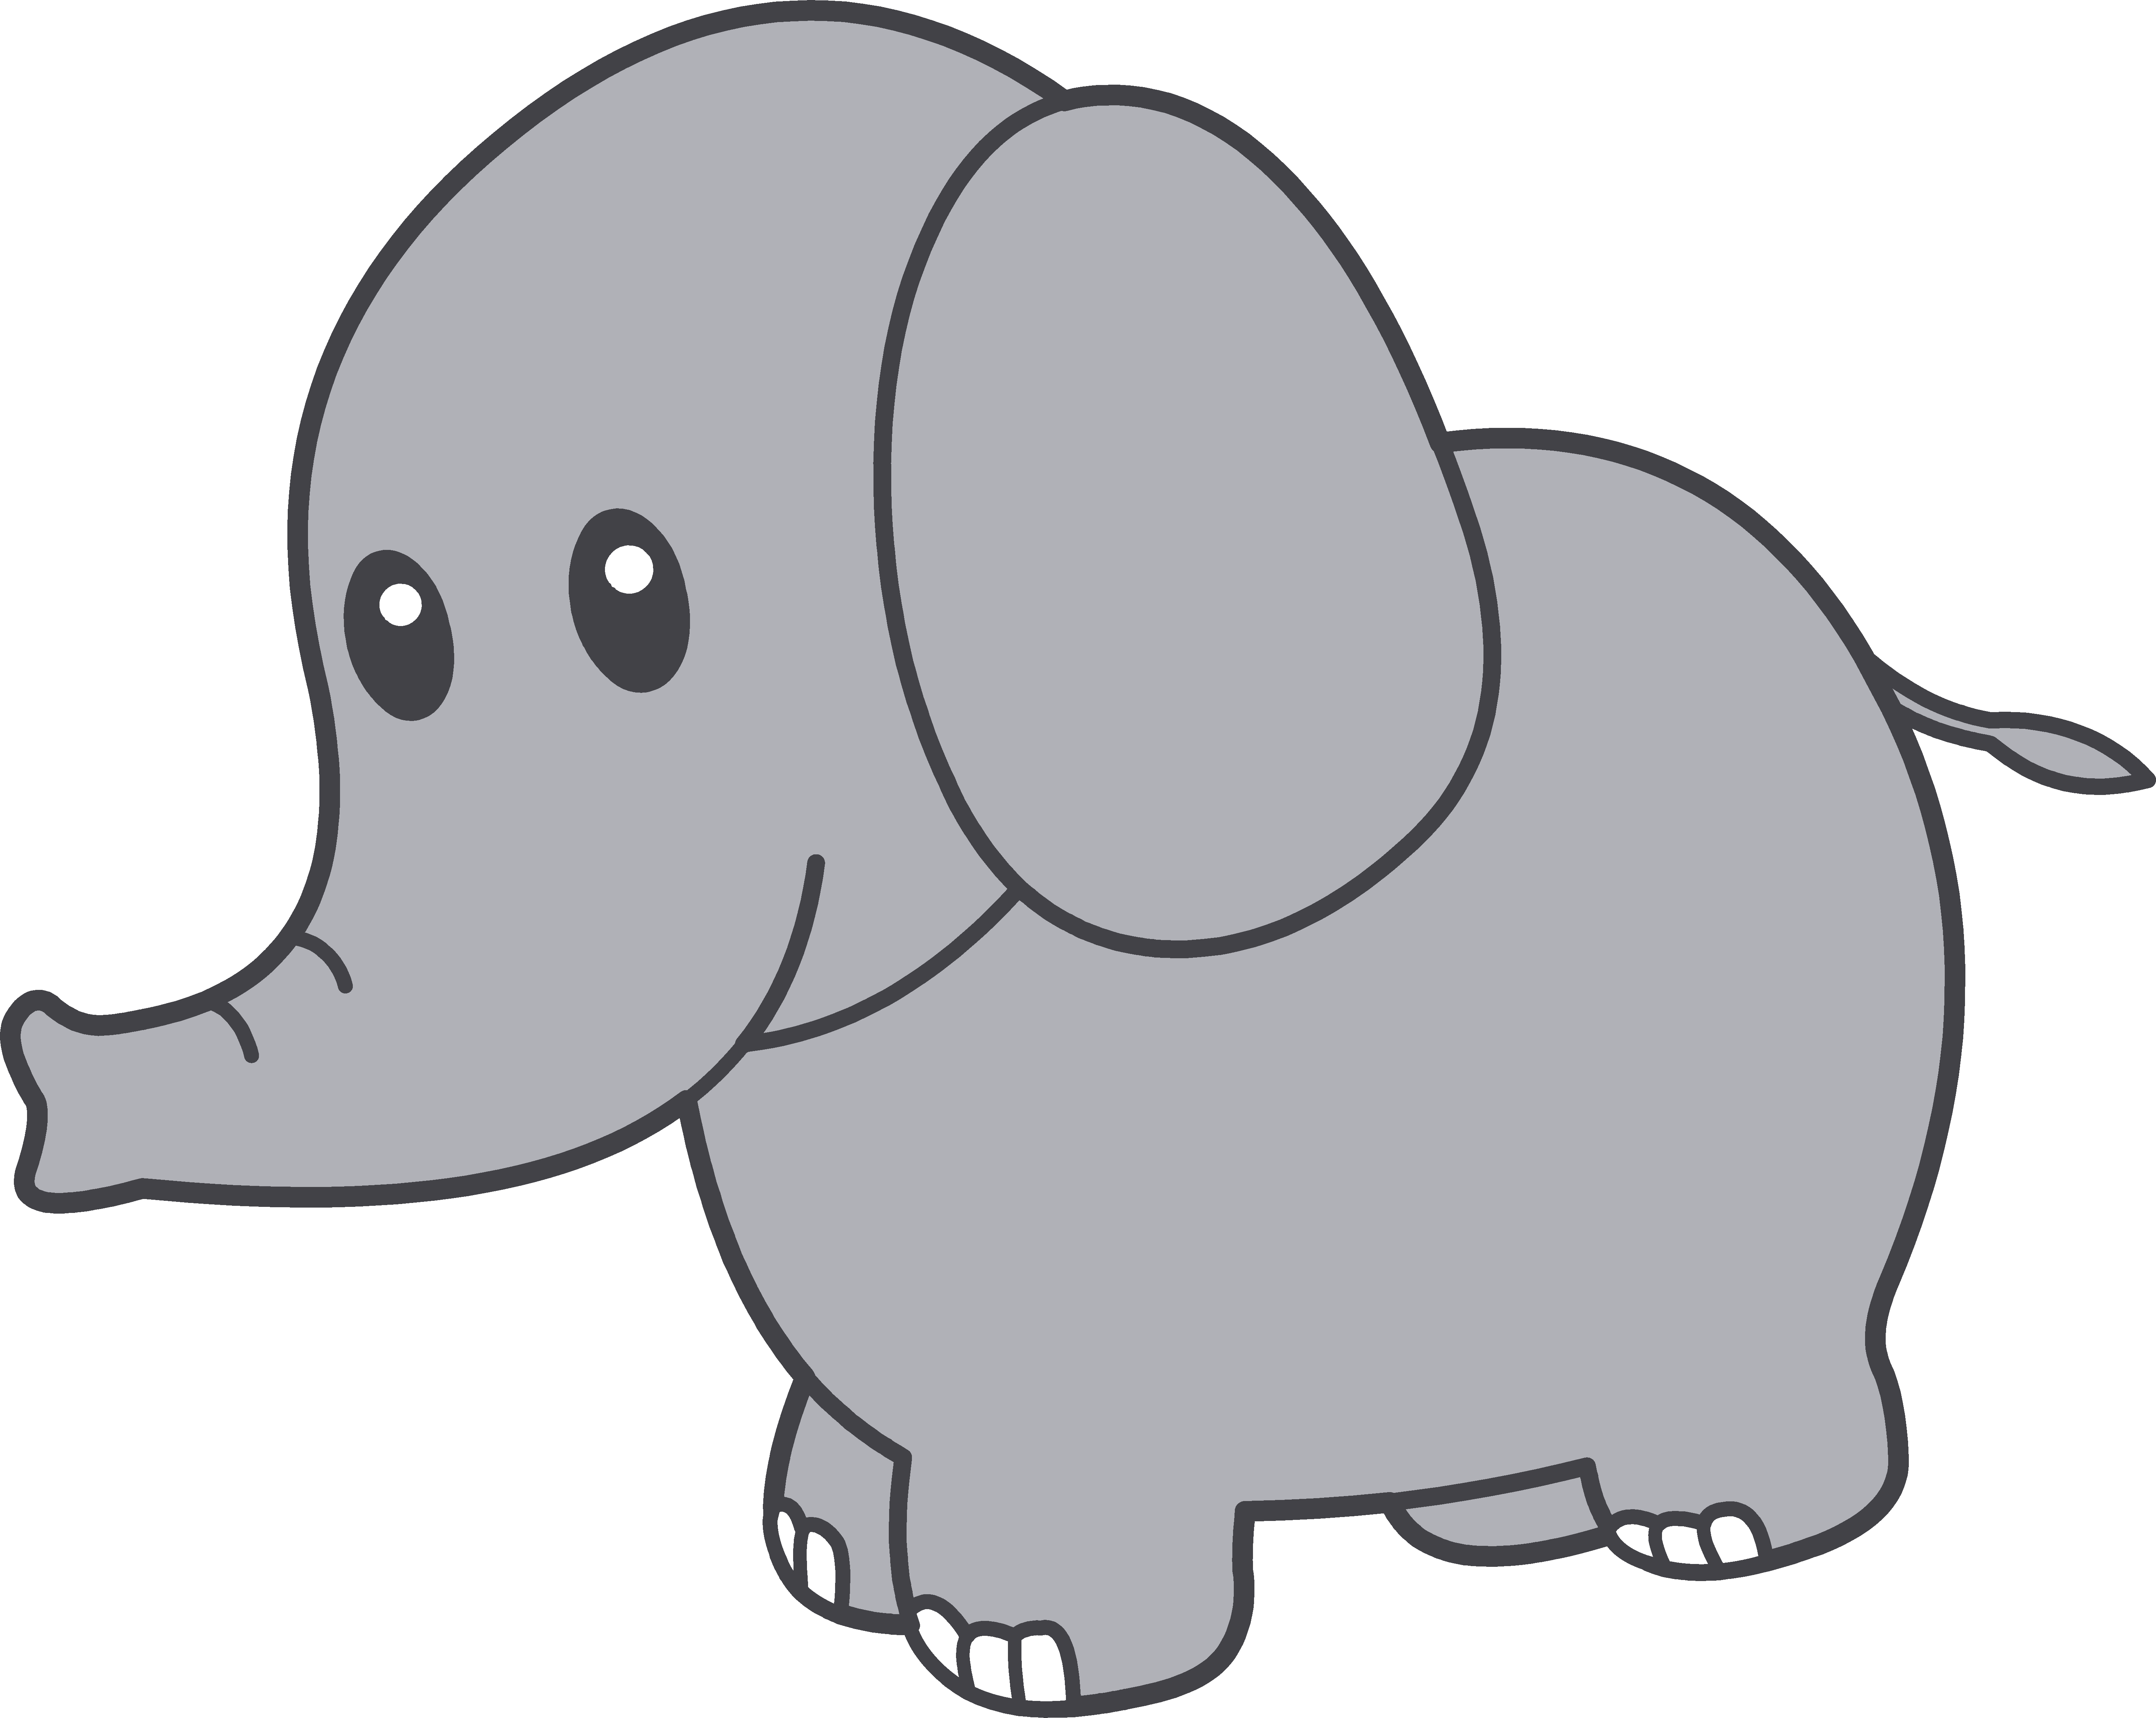 Free elephant face clipart without background